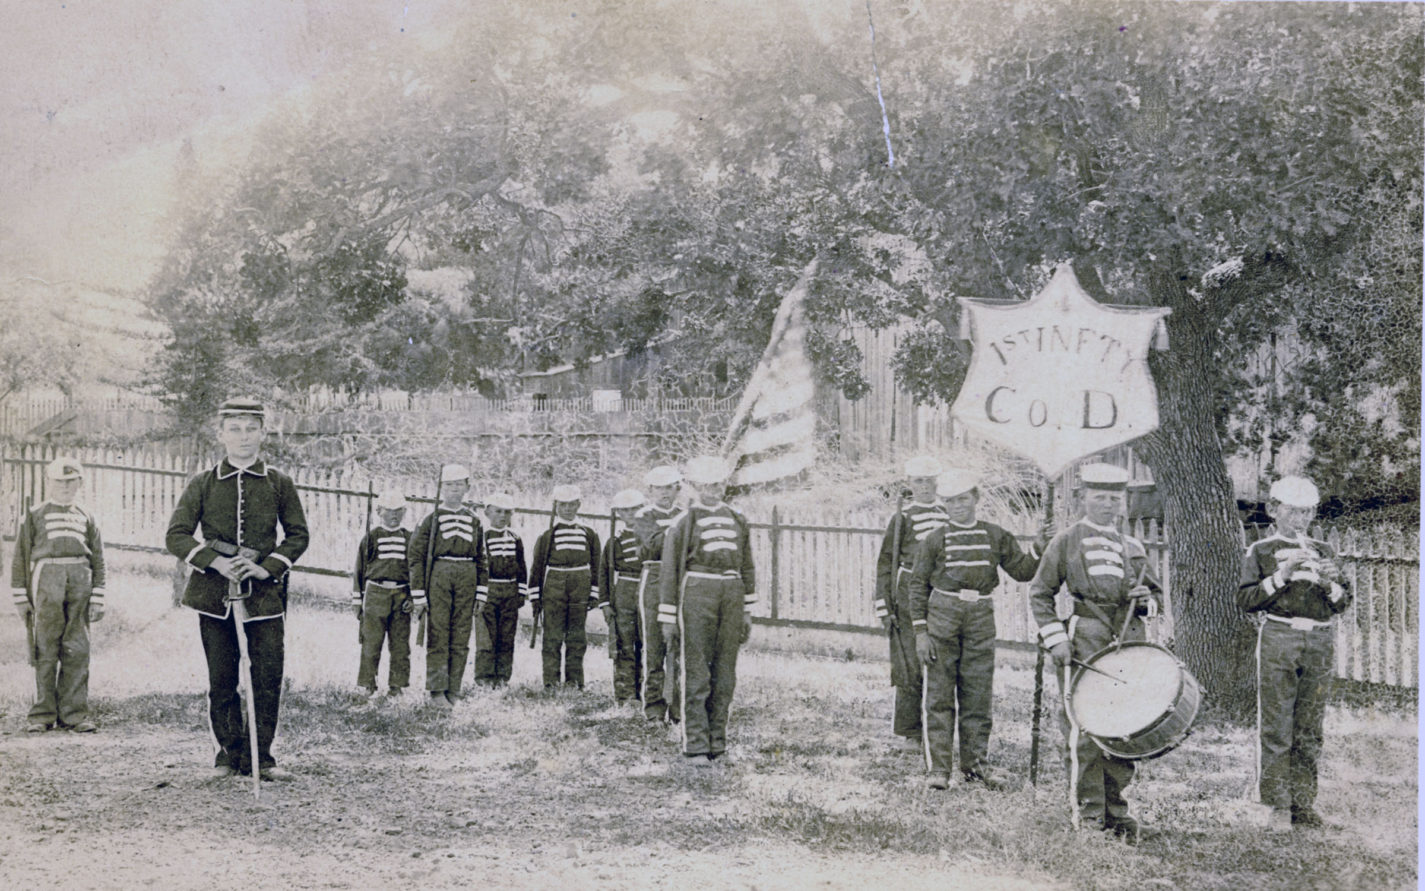 Young boys dressed in uniforms with toy rifle, fife and drum from the First Infantry Company D circa 1880s